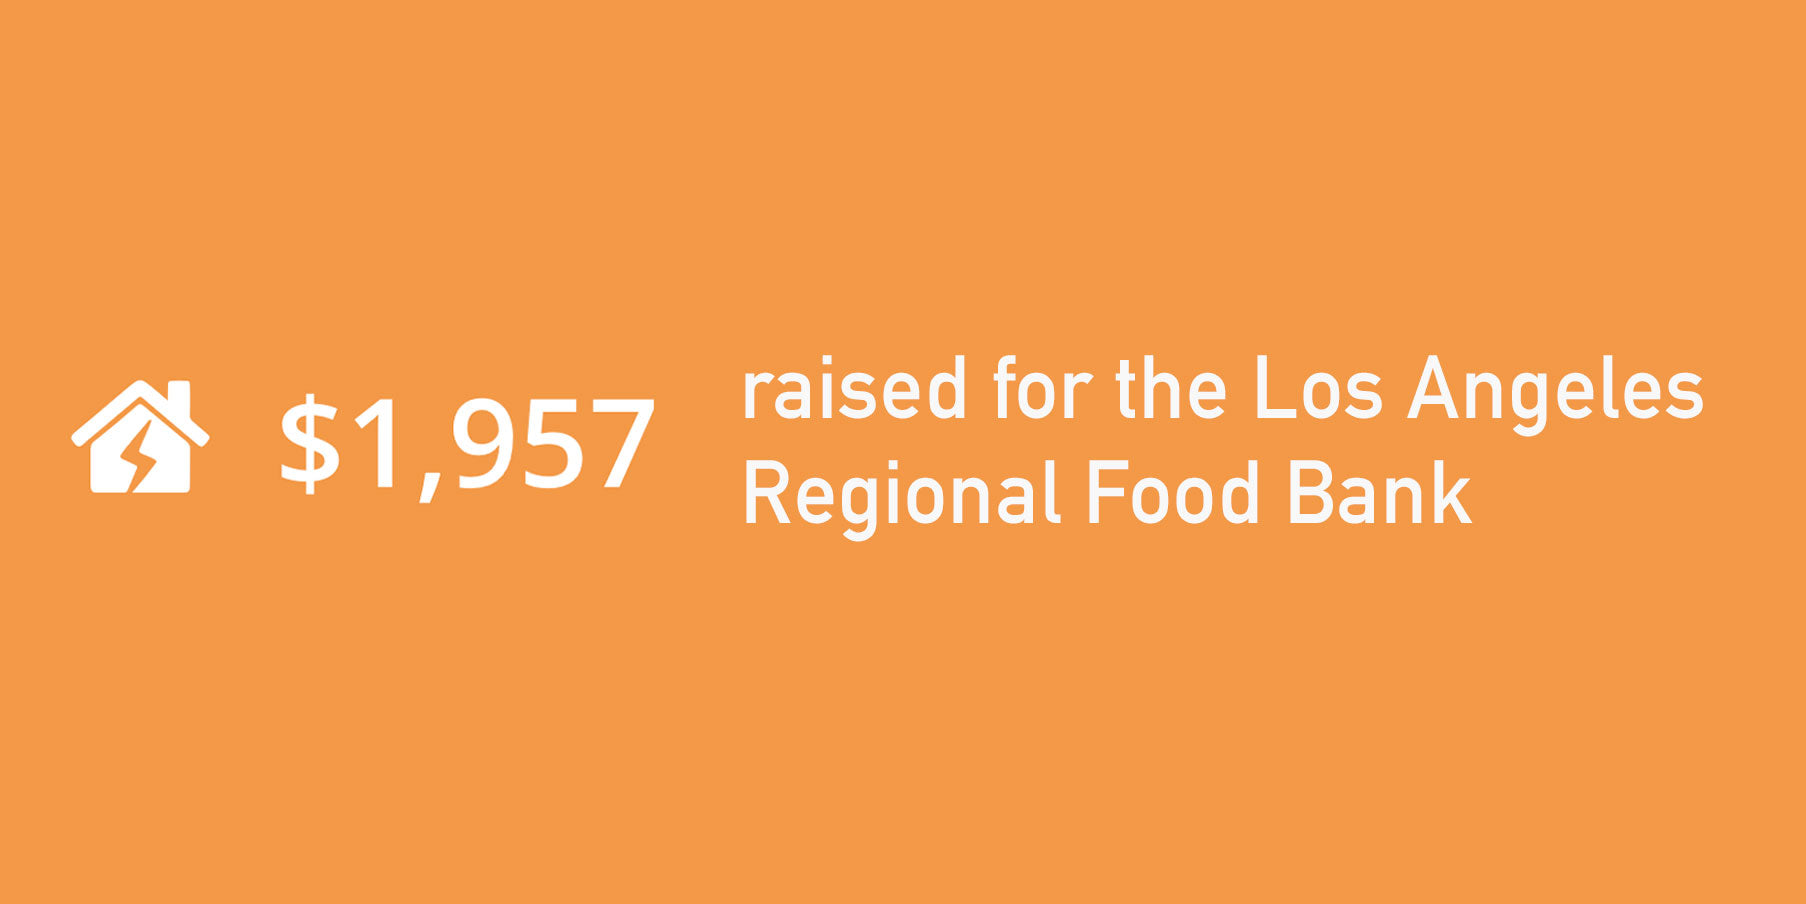 Fundraising Report for the LA Regional Food Bank